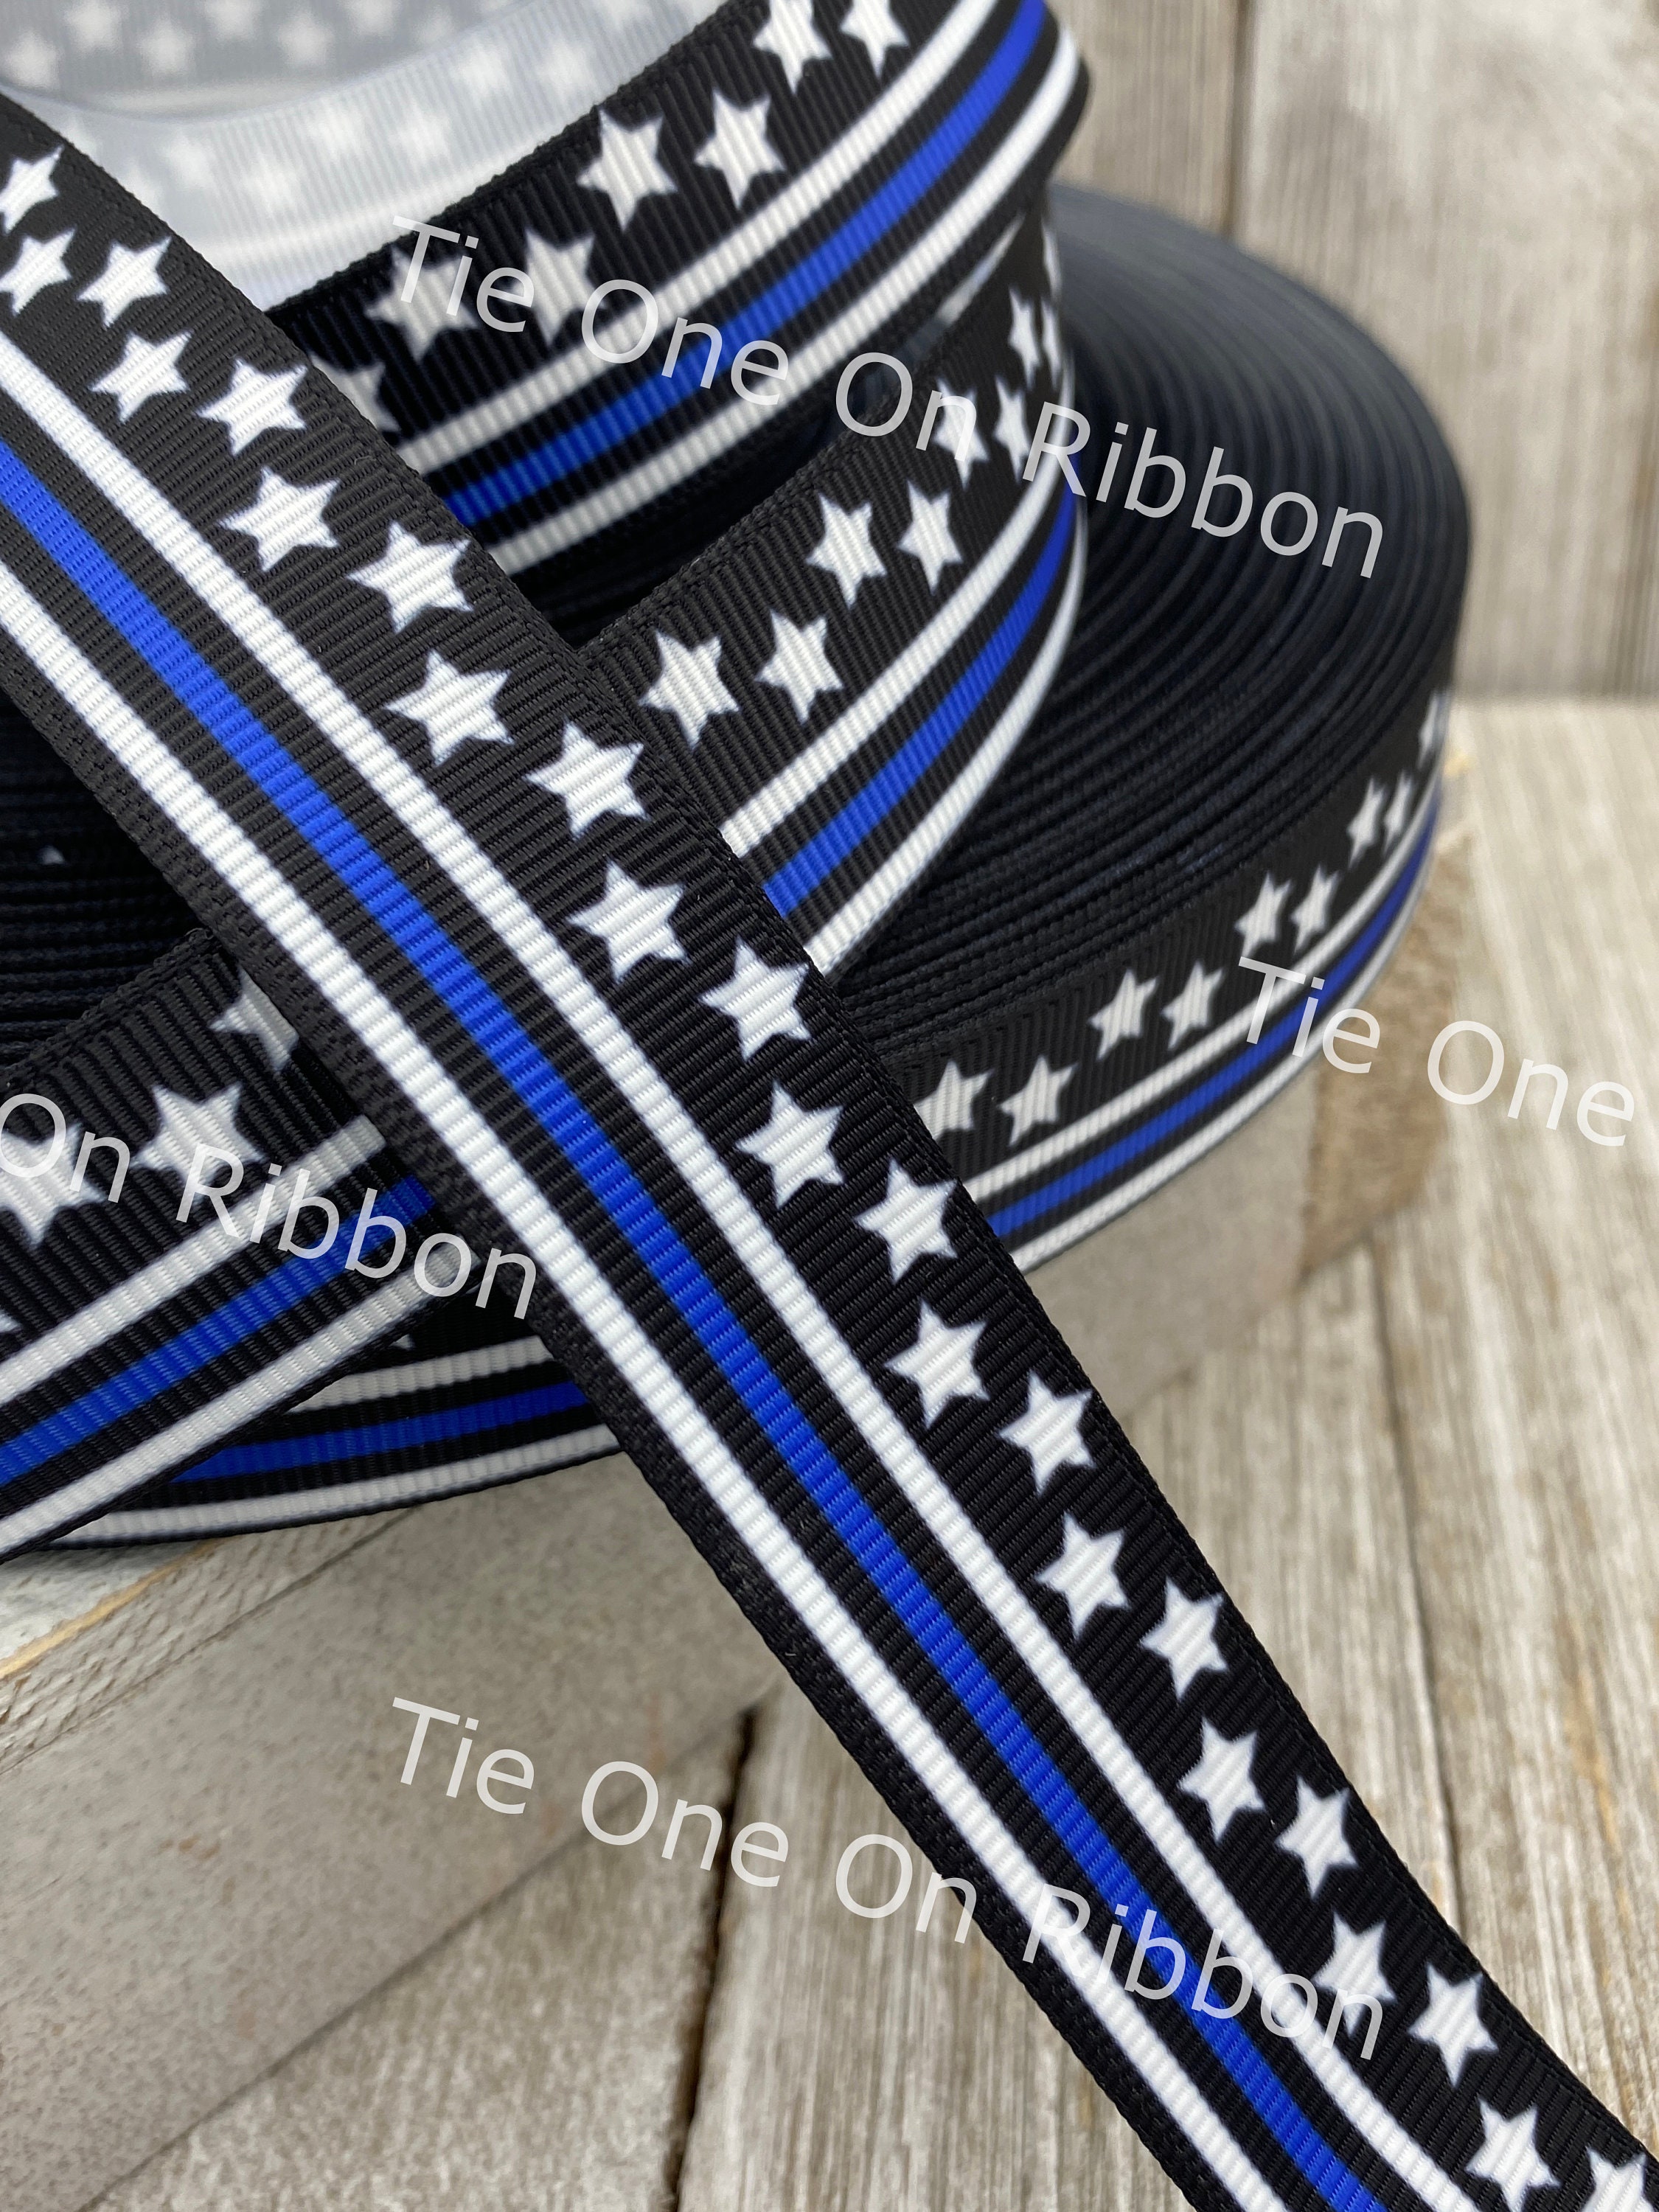 Thin Blue Line Ornament, Available in Black & White - Thin Blue Line USA